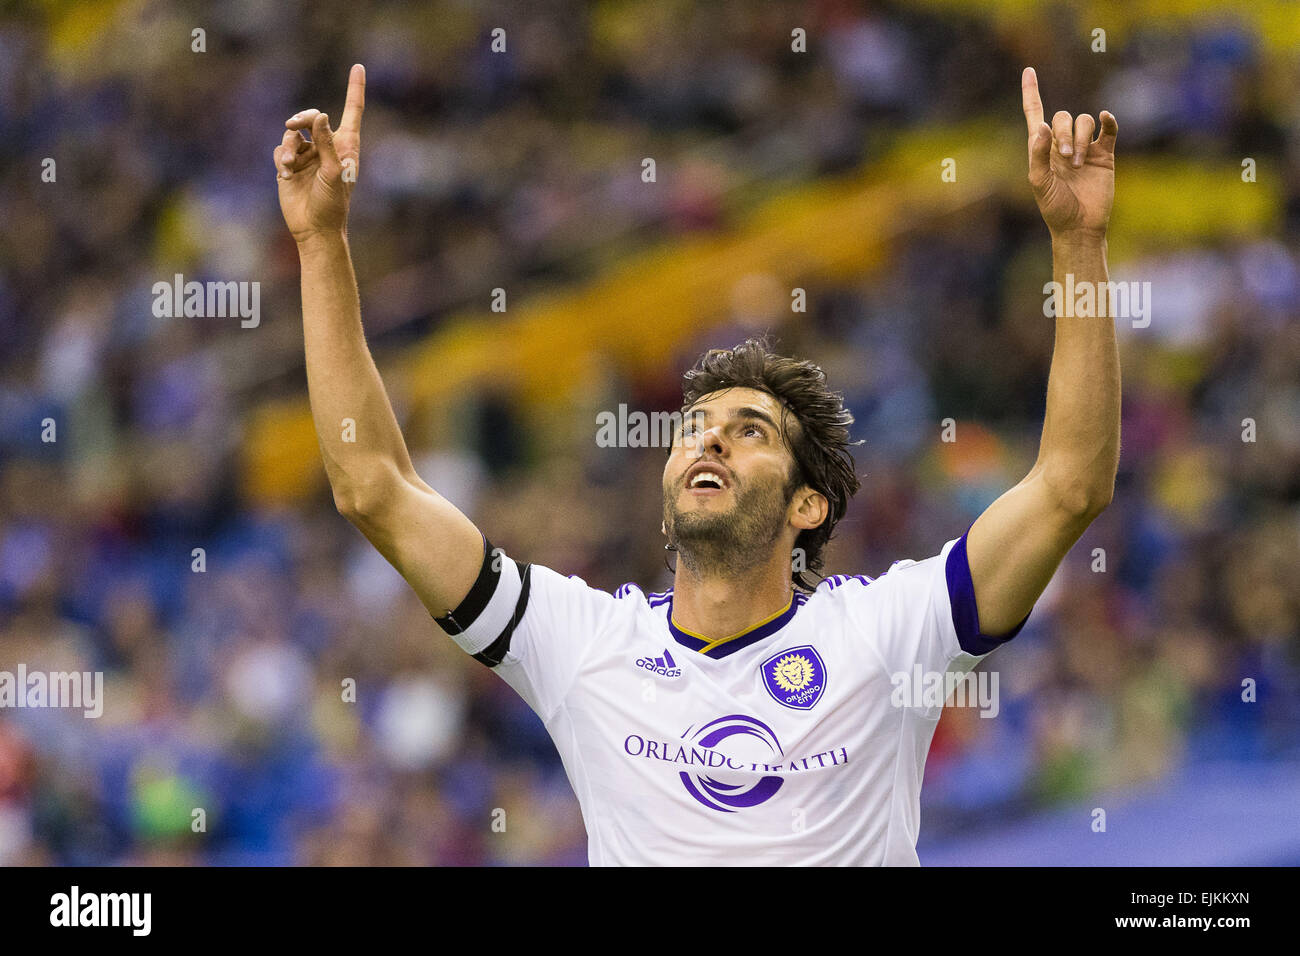 Mar 28, 2015 : Orlando City FC midfielder Kaka #10 celebrates his goal during the first half of a MLS game between the Orlando City FC and the Montreal Impact at the Montreal Olympic Stadium in Montreal, Quebec, Canada. Philippe Bouchard/Cal Sport Media Stock Photo